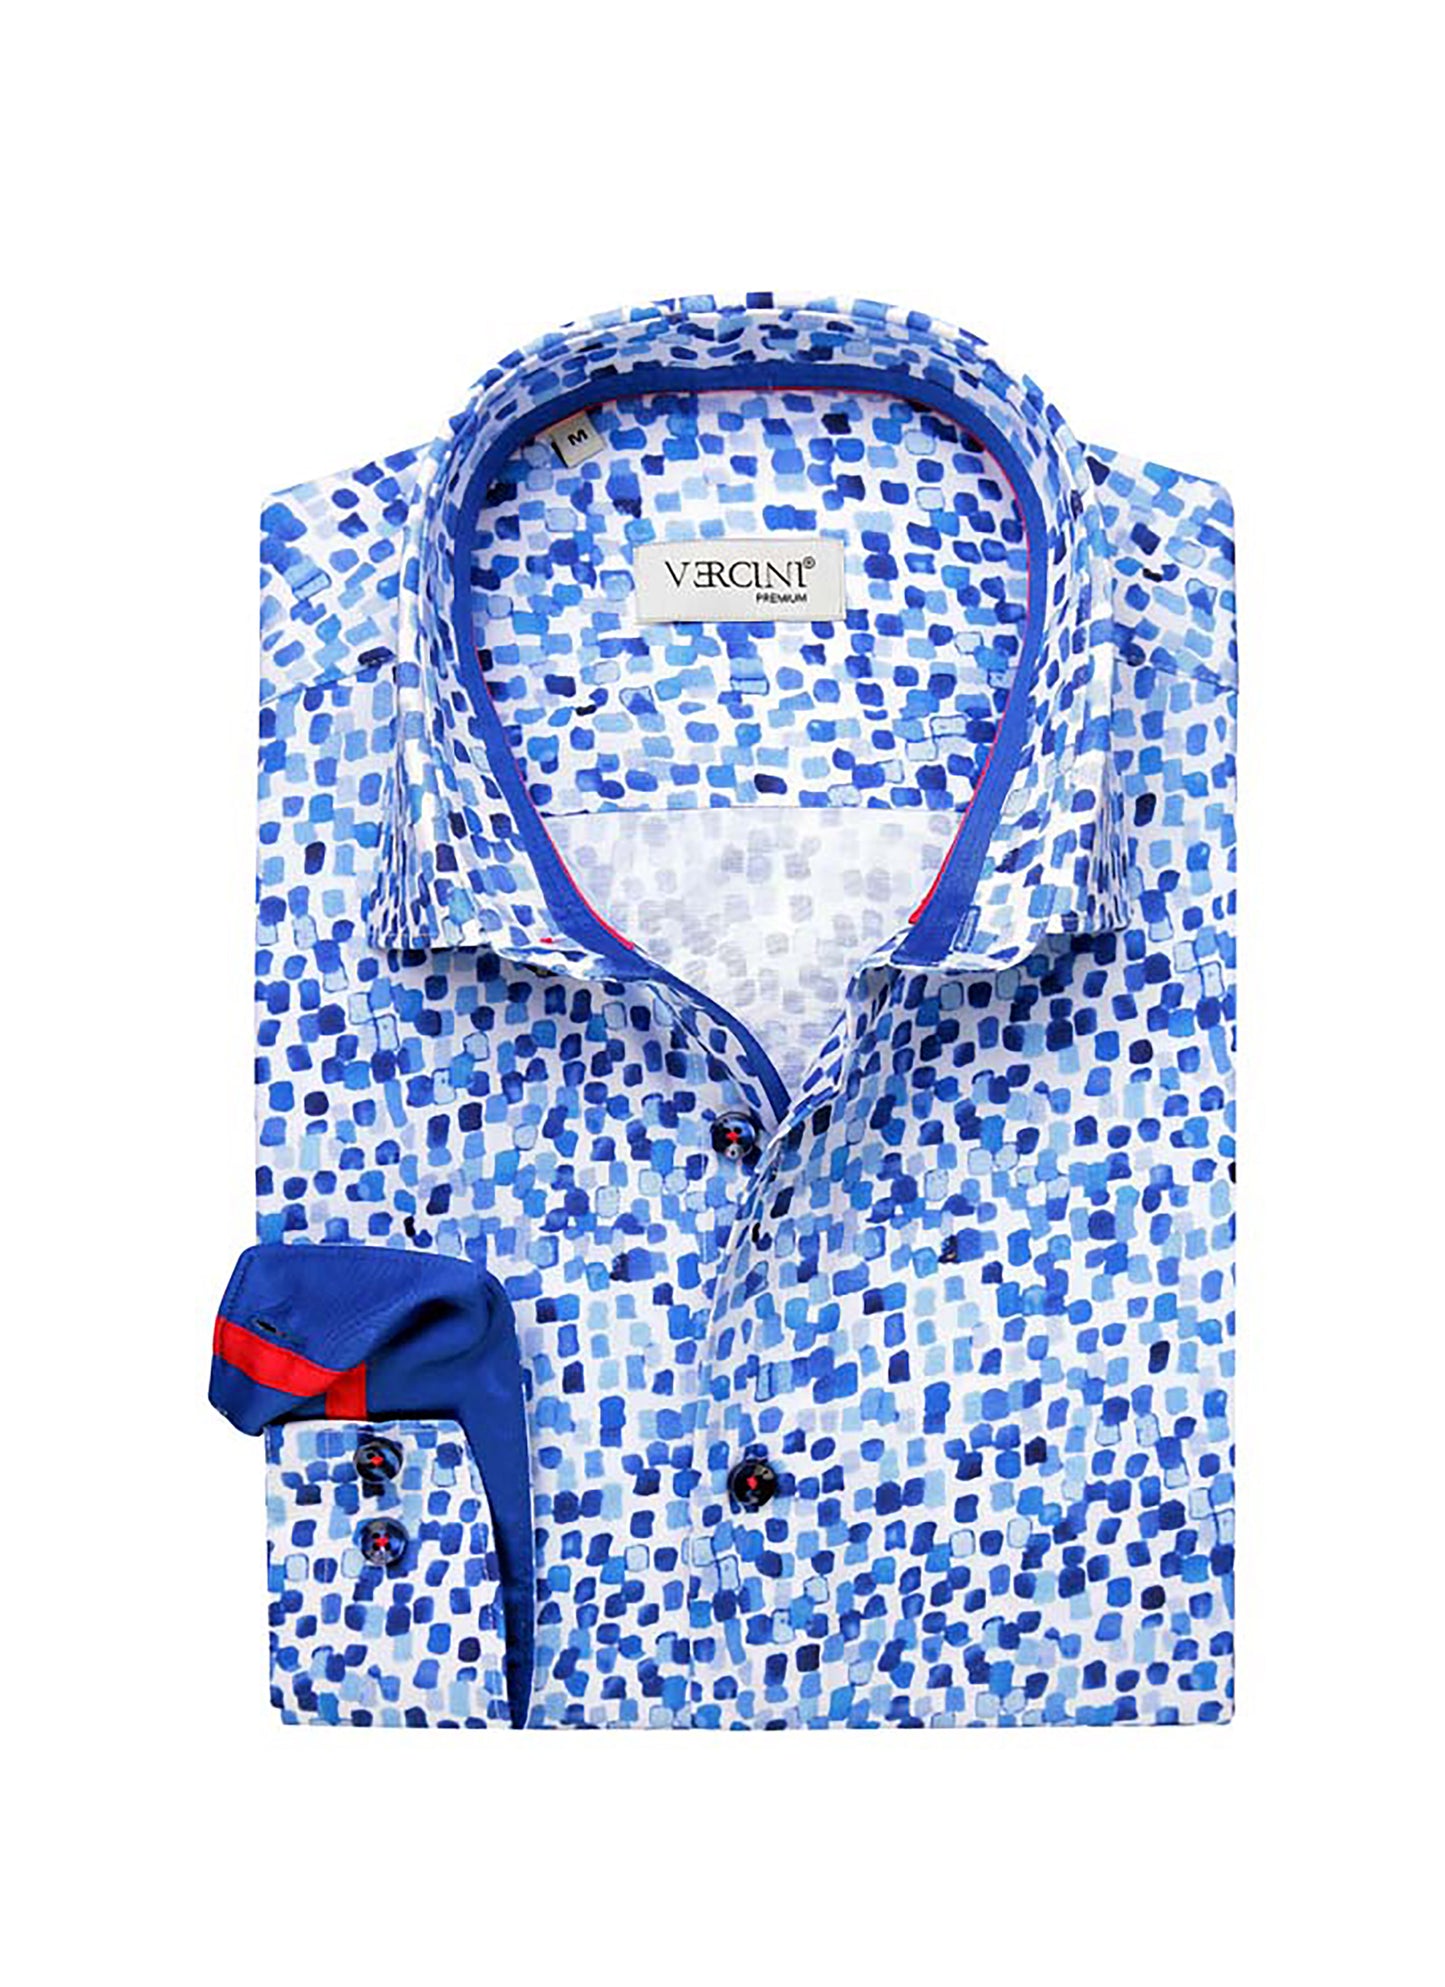 BLUE AND WHITE POCKDOT CASUAL SHIRT On Sale 30% Off Vercini